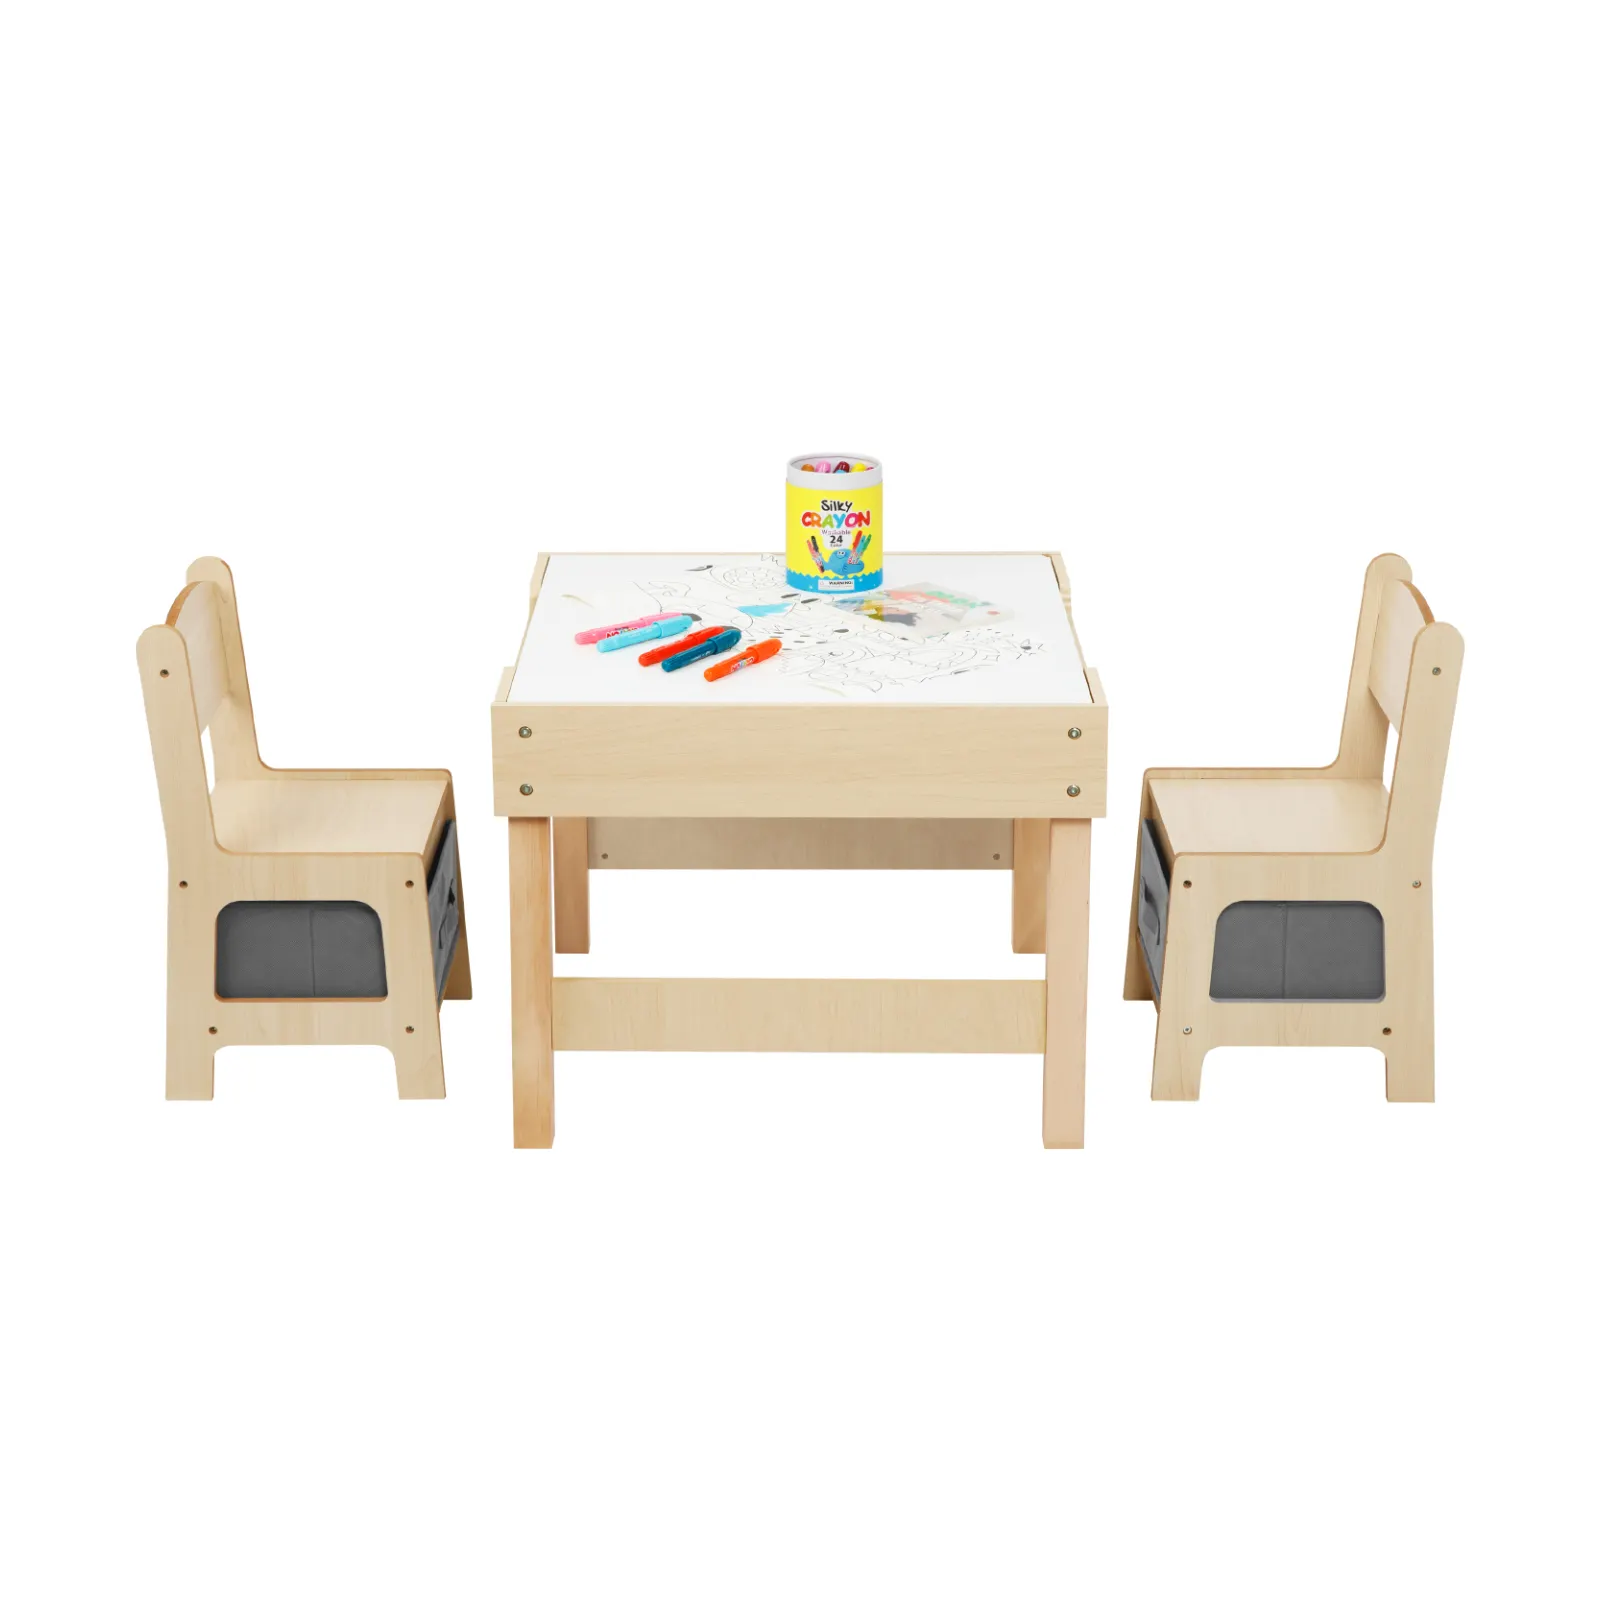 Wood Kids' Furniture Sets Double Side blackboard Table and Chairs for kids Activity Table with Storage box